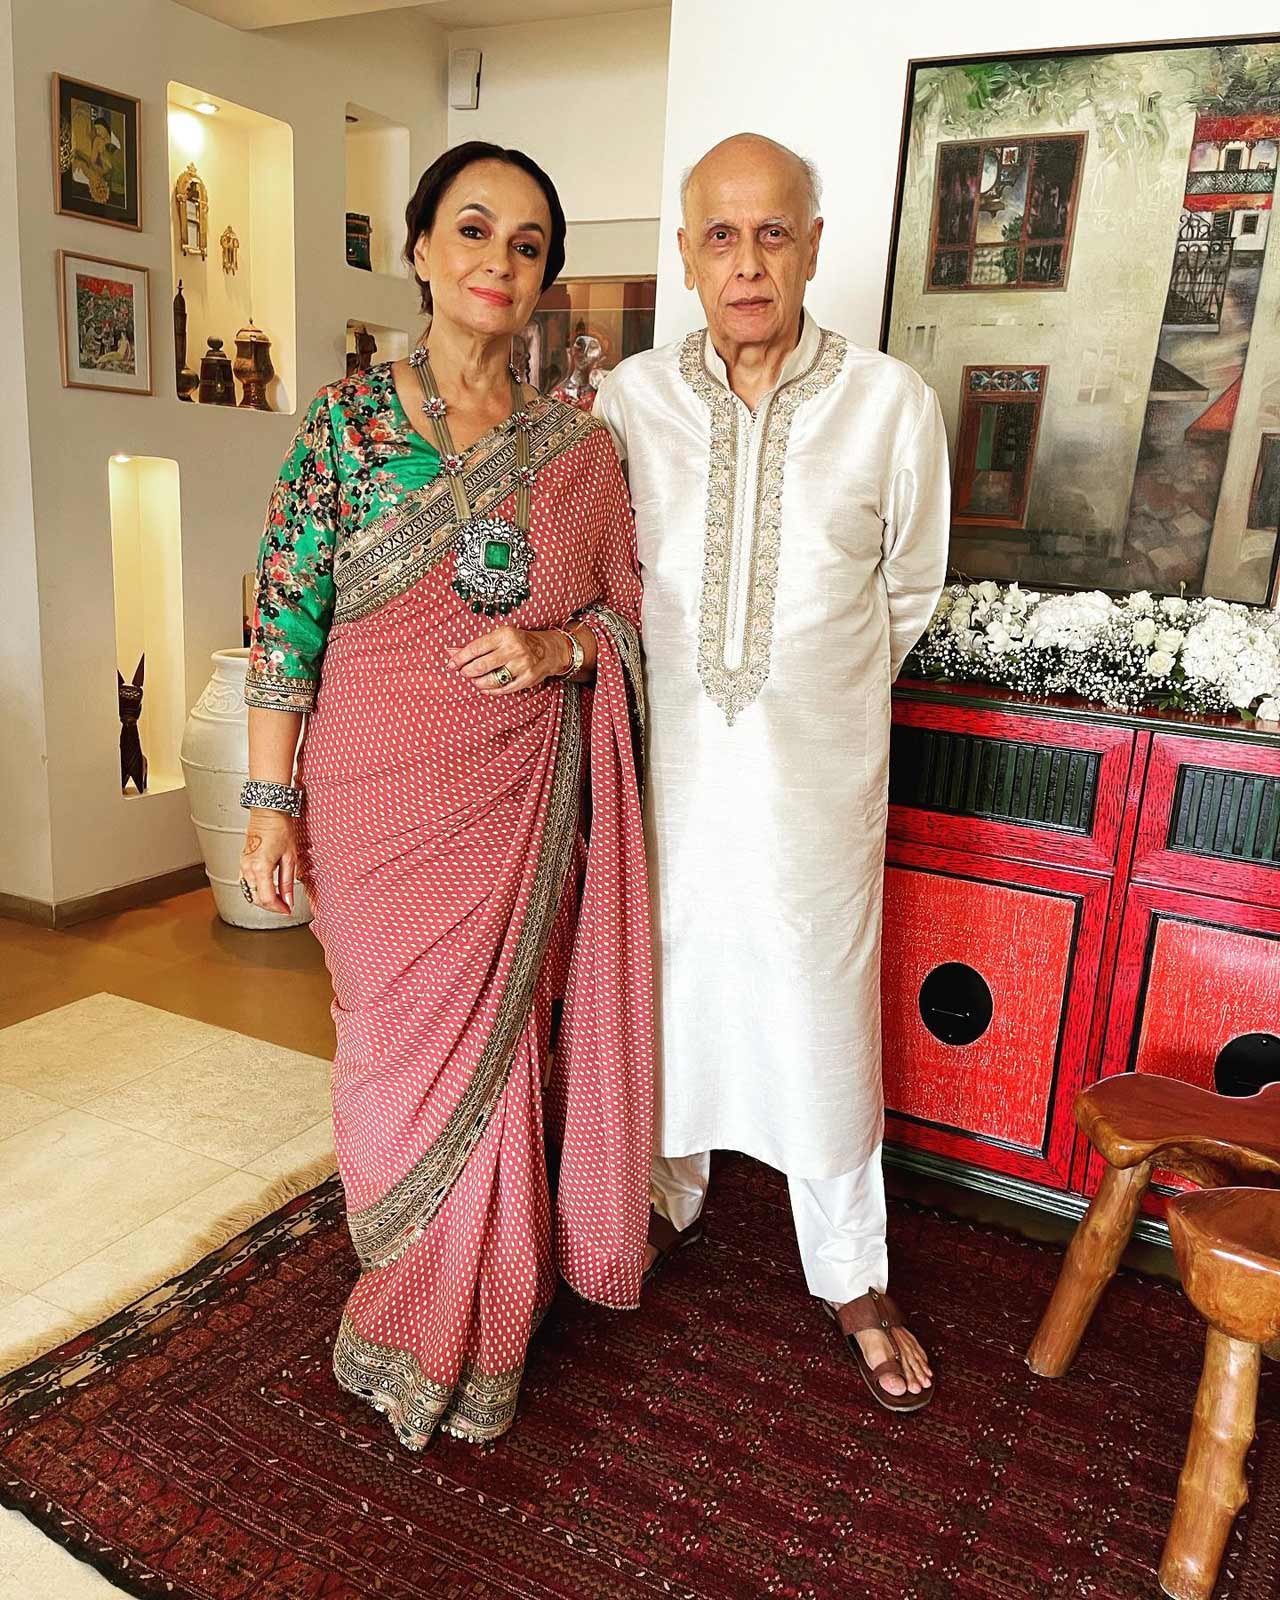 After exchanging the nuptials, Ranbir Kapoor and Alia Bhatt, who were dressed in shimmery Sabyasachi outfits cut their 3-tier wedding cake and raised a toast to the new beginnings.
In picture: Mahesh Bhatt and Soni Razdan all decked up for their daughter's special day. The actress shared the picture and wrote, 